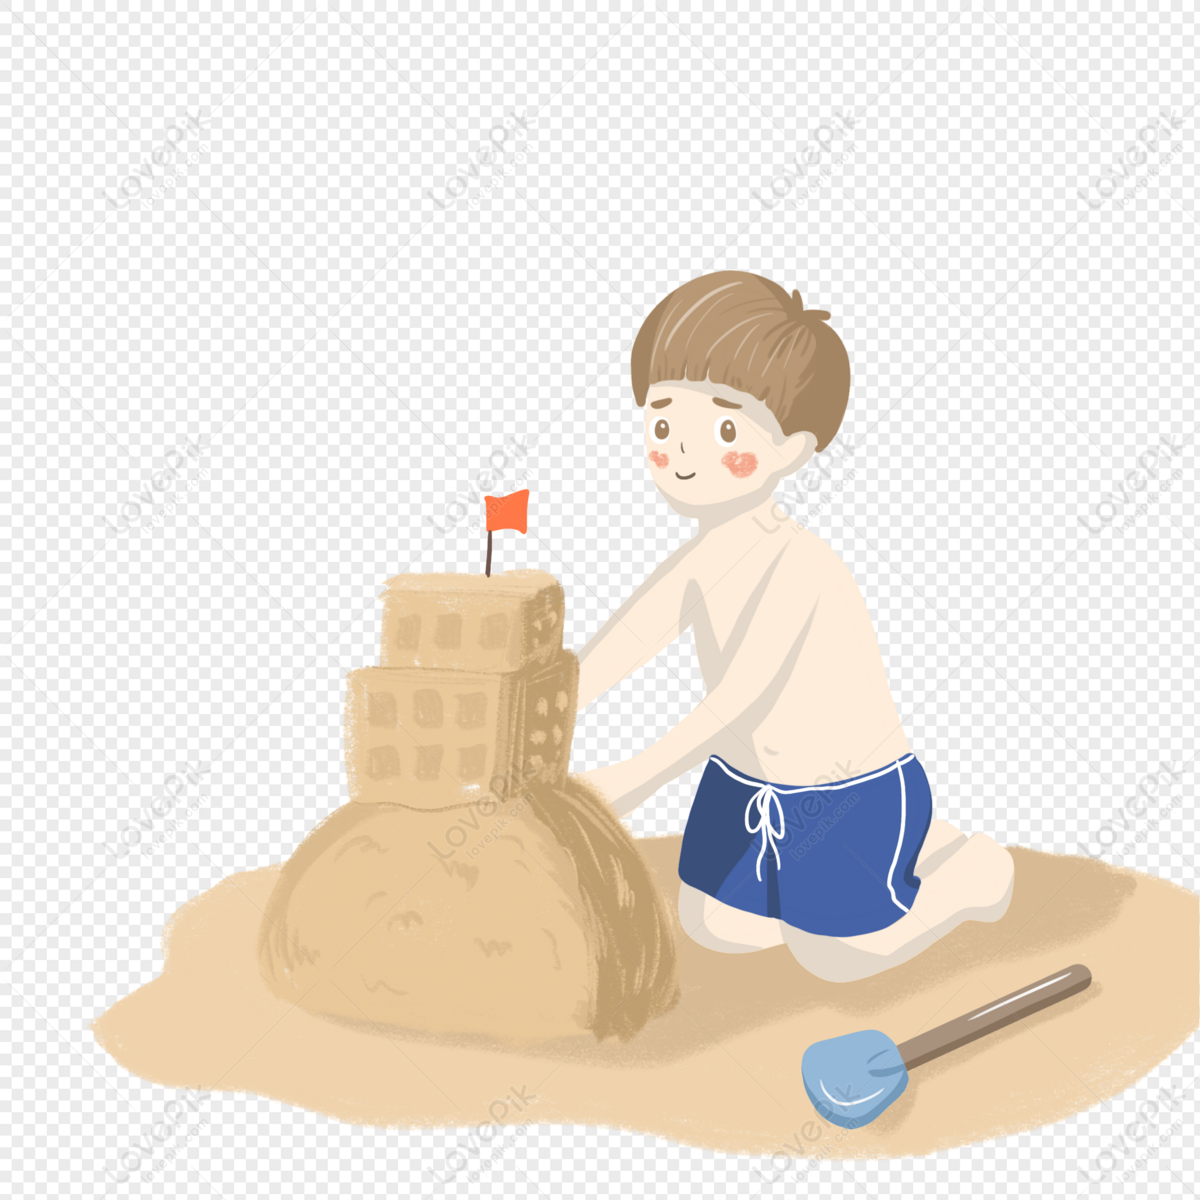 Cartoon Boy Stacking Sand Castle PNG Picture And Clipart Image For Free  Download - Lovepik | 401425385